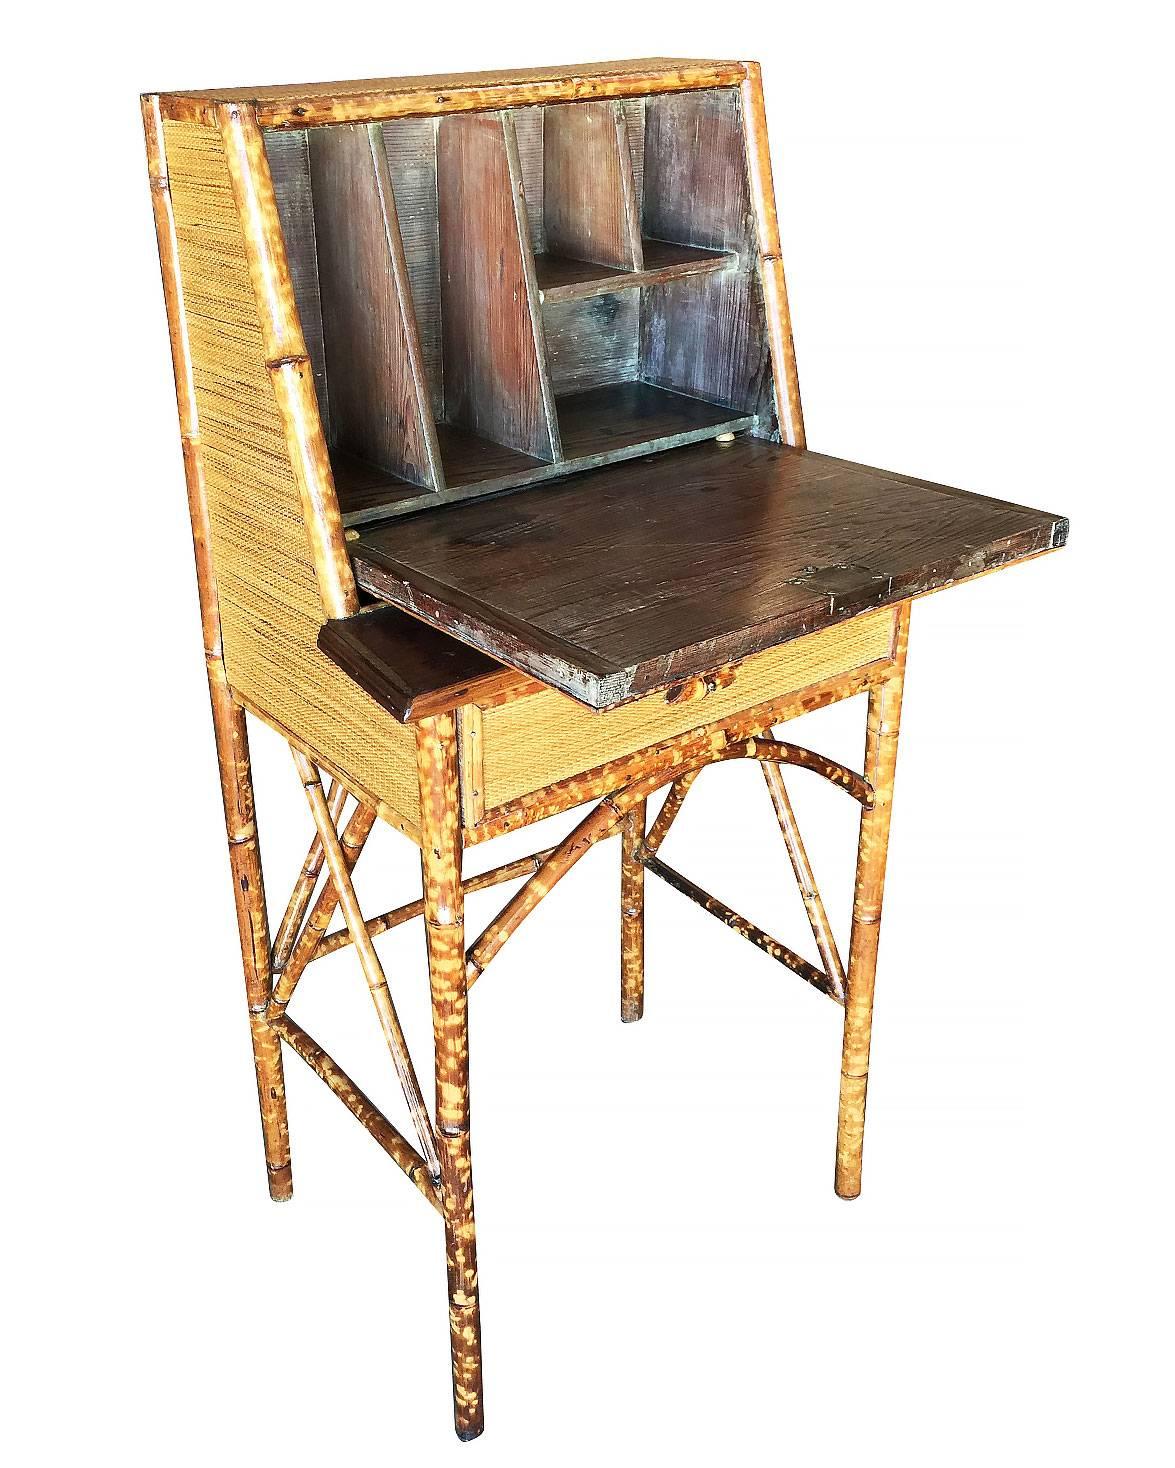 Tiger bamboo secretary desk with handwoven rice mat coverings, center drawer and flip down front opening to five small selves for papers and stationary.


Restored to new for you.

All rattan, bamboo and wicker furniture has been painstakingly